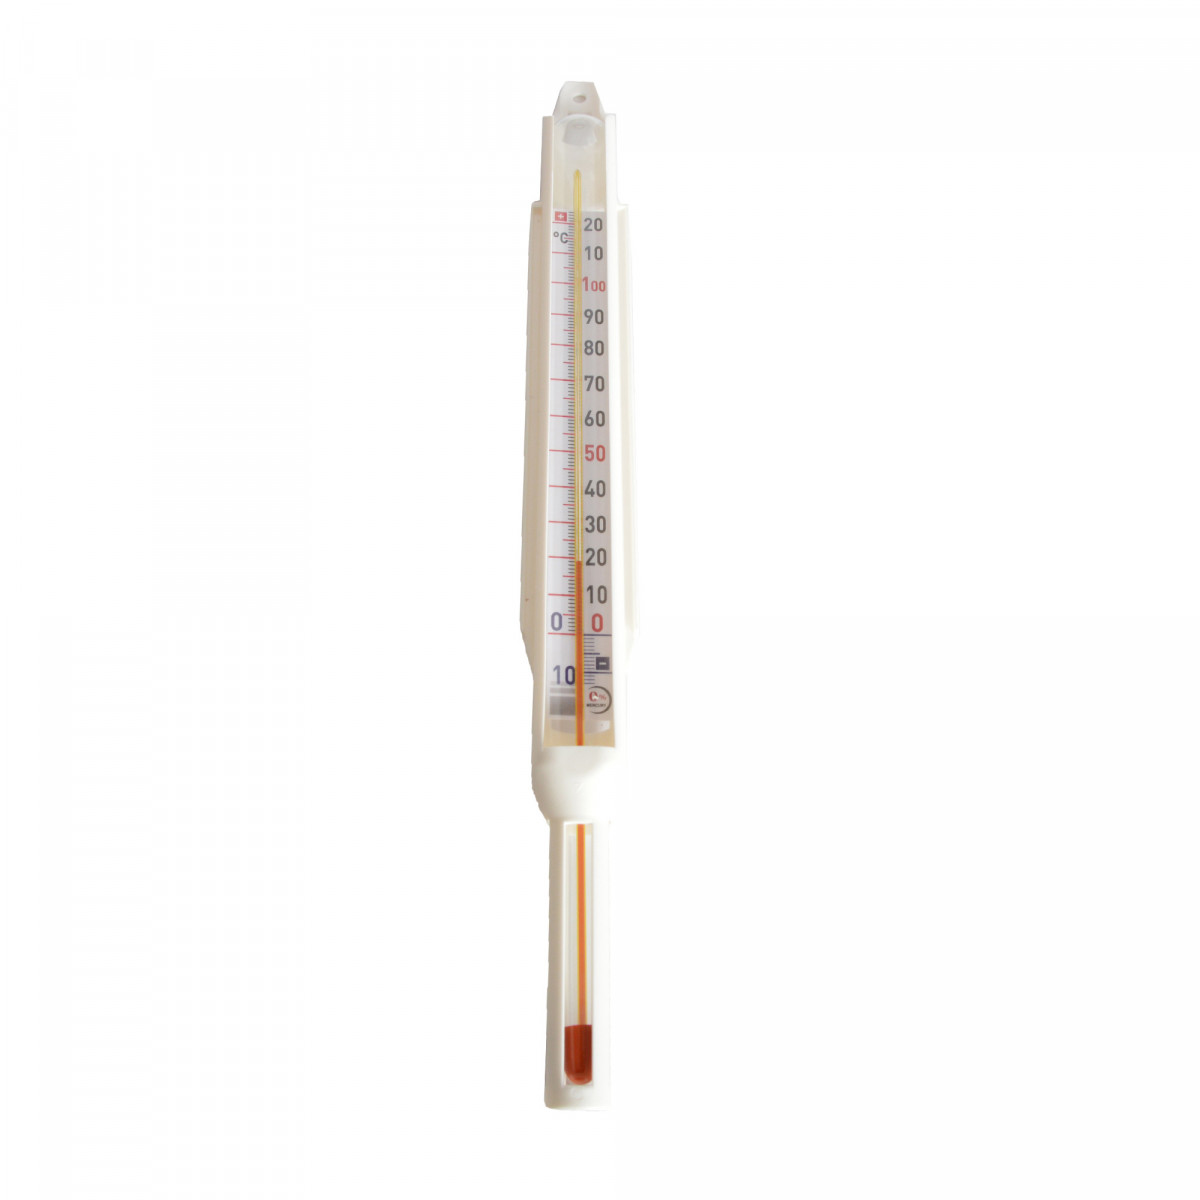 https://brouwland.com/20409-extra_large/brewferm-mash-thermometer-with-protective-cover-10-120c.jpg